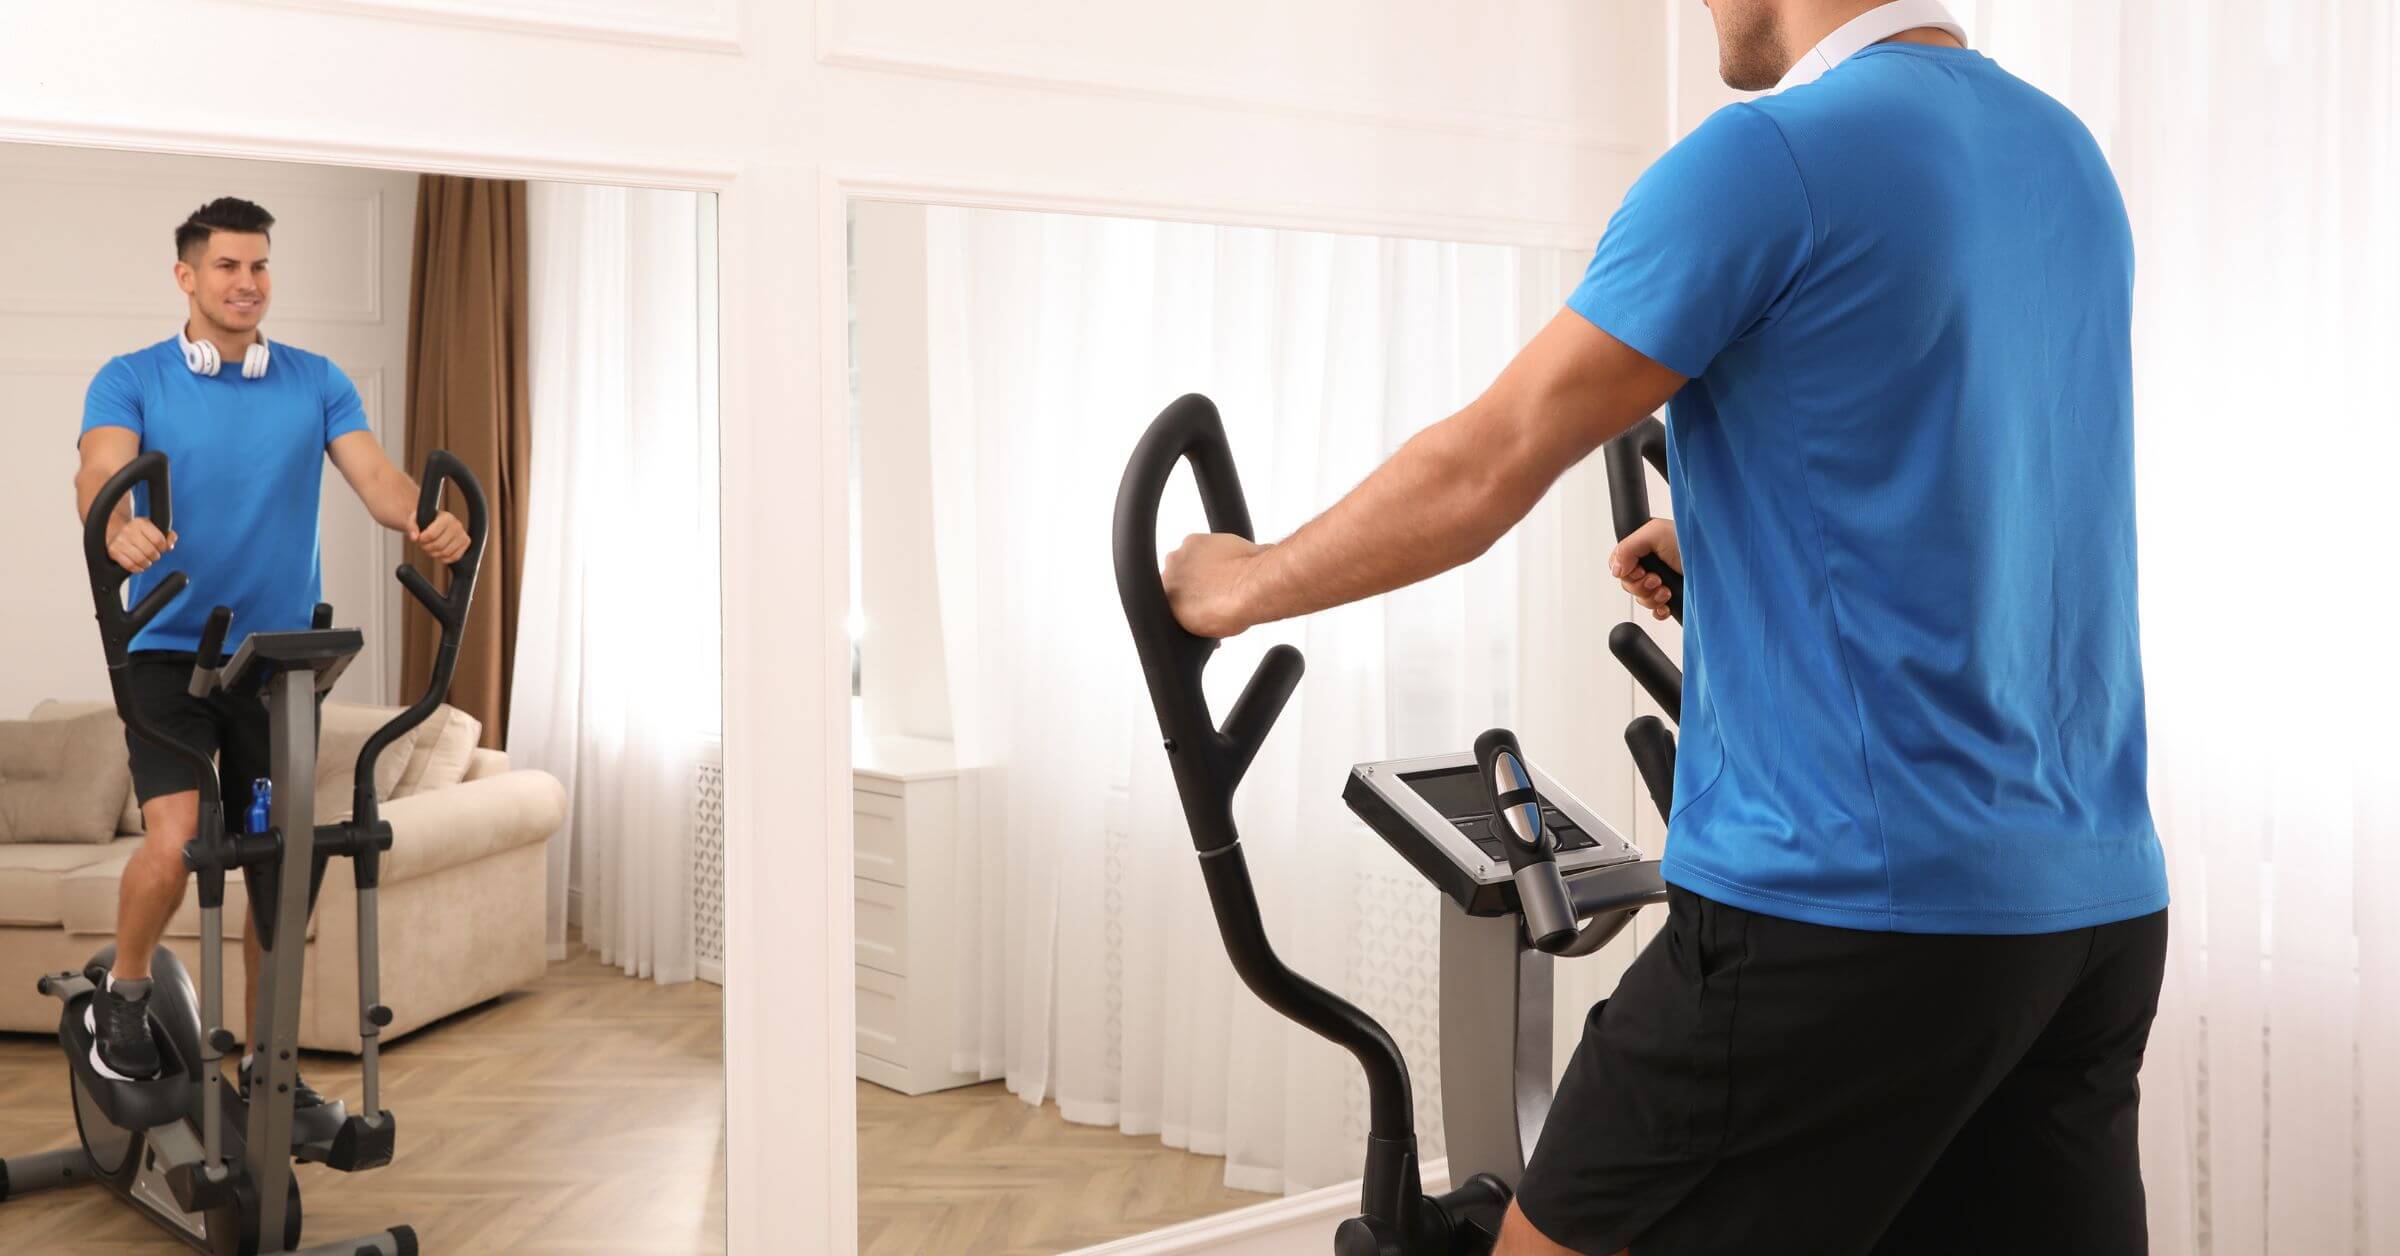 Tips to maximize your elliptical workouts